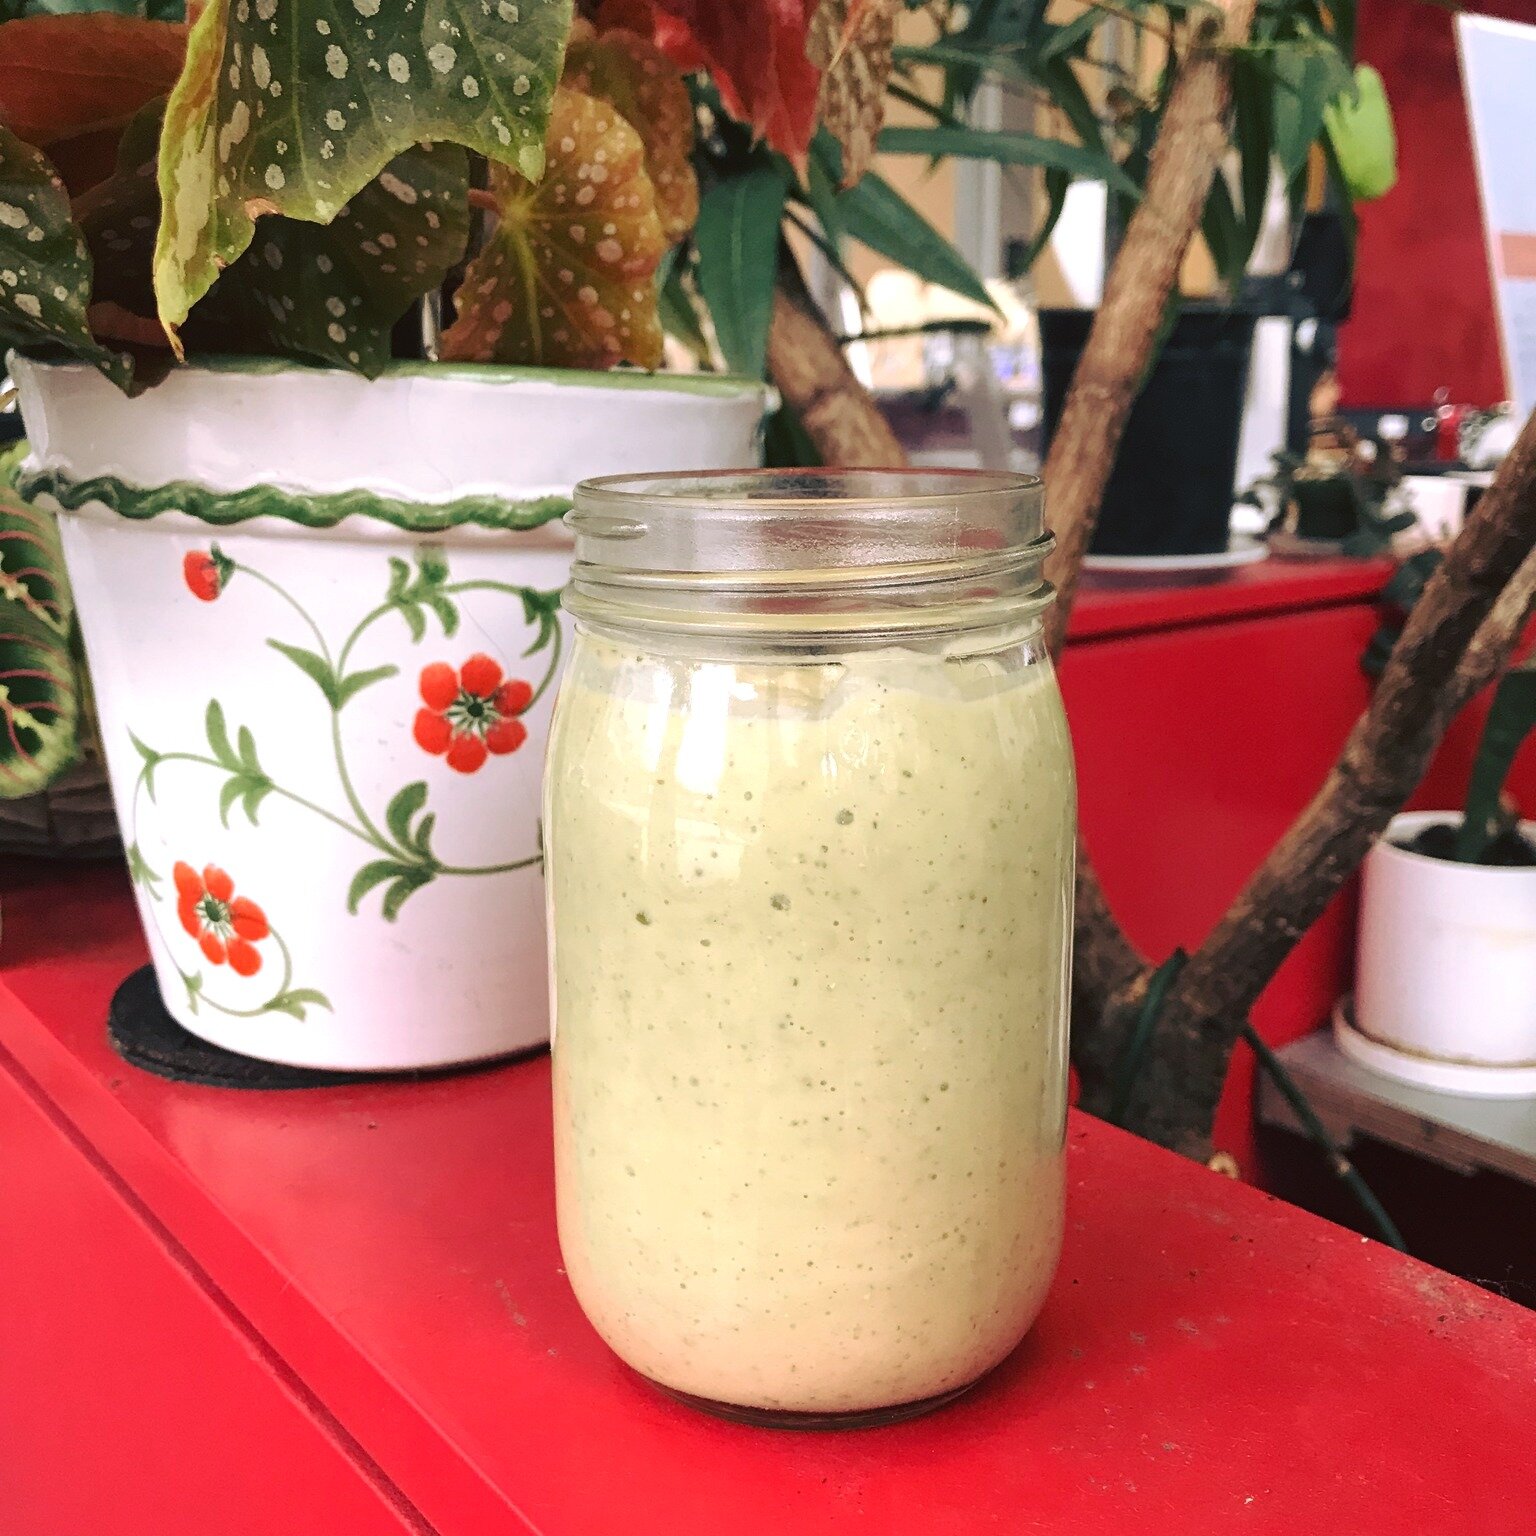 Have you had our new Avobanana smoothie yet? Here at Dear Mama we only bring you the FRESHEST ingredients. Mixed almond milk, chia seeds, vanilla, and agave, this new addition to our family is vegetarian AND vegan. And we can't get enough! #harlemveg